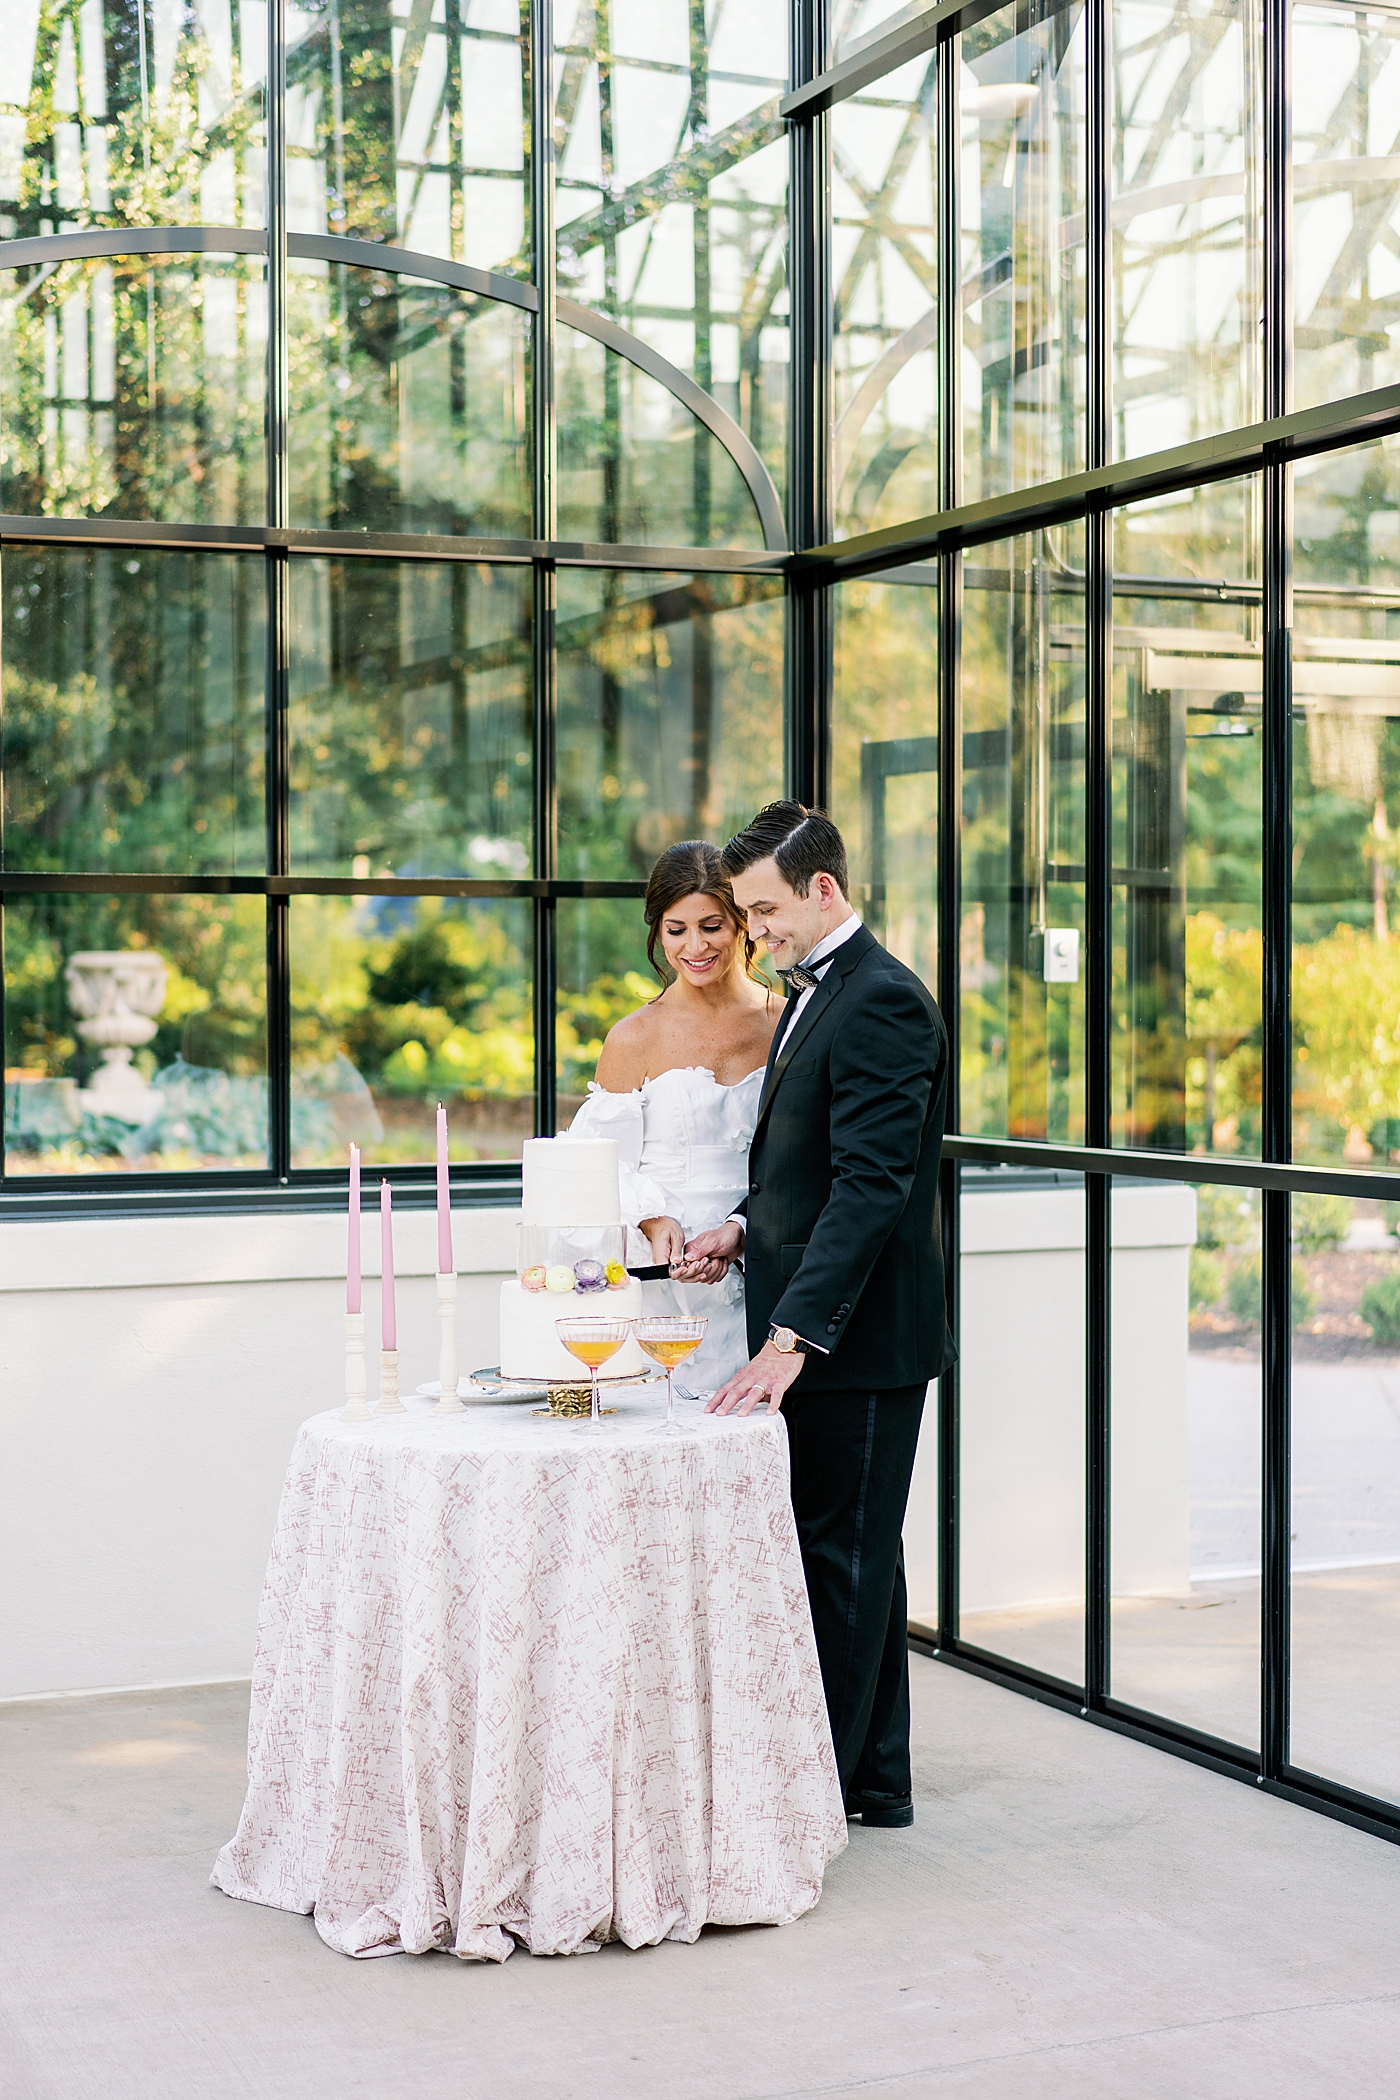 Bride and groom cutting their cake during summer inspired garden wedding | Photo by Annie Laura Photo